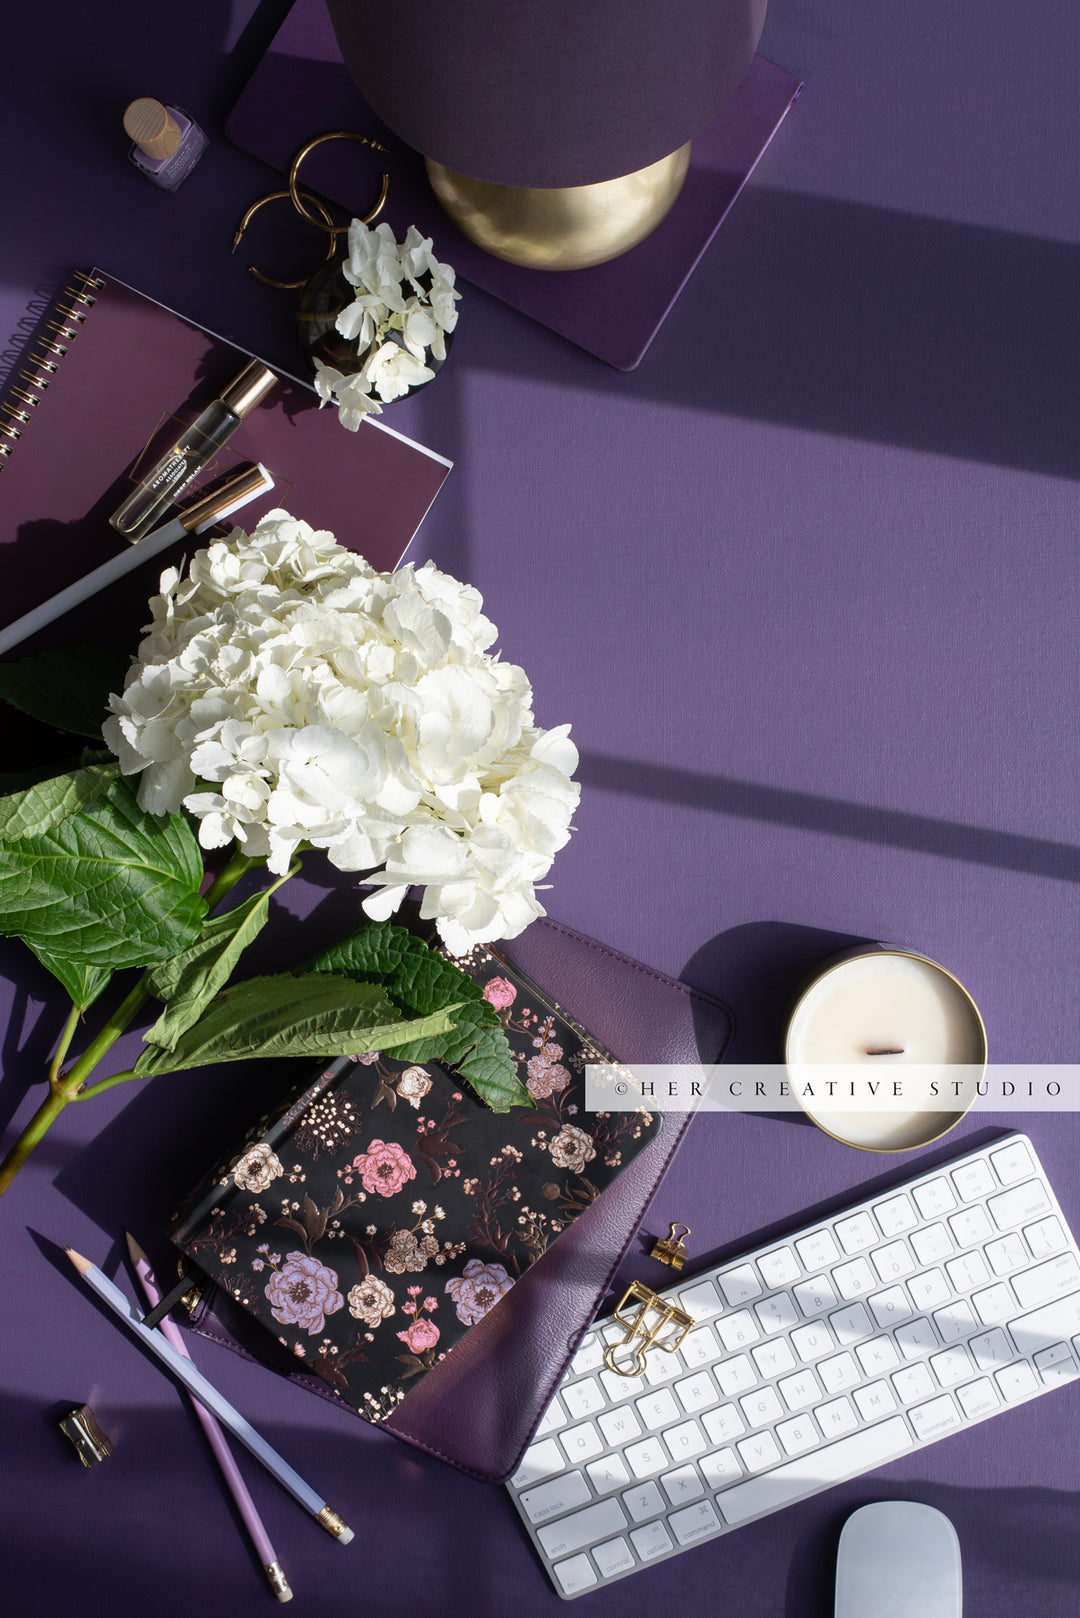 Purple Workspace With White Florals, Stock Photo.